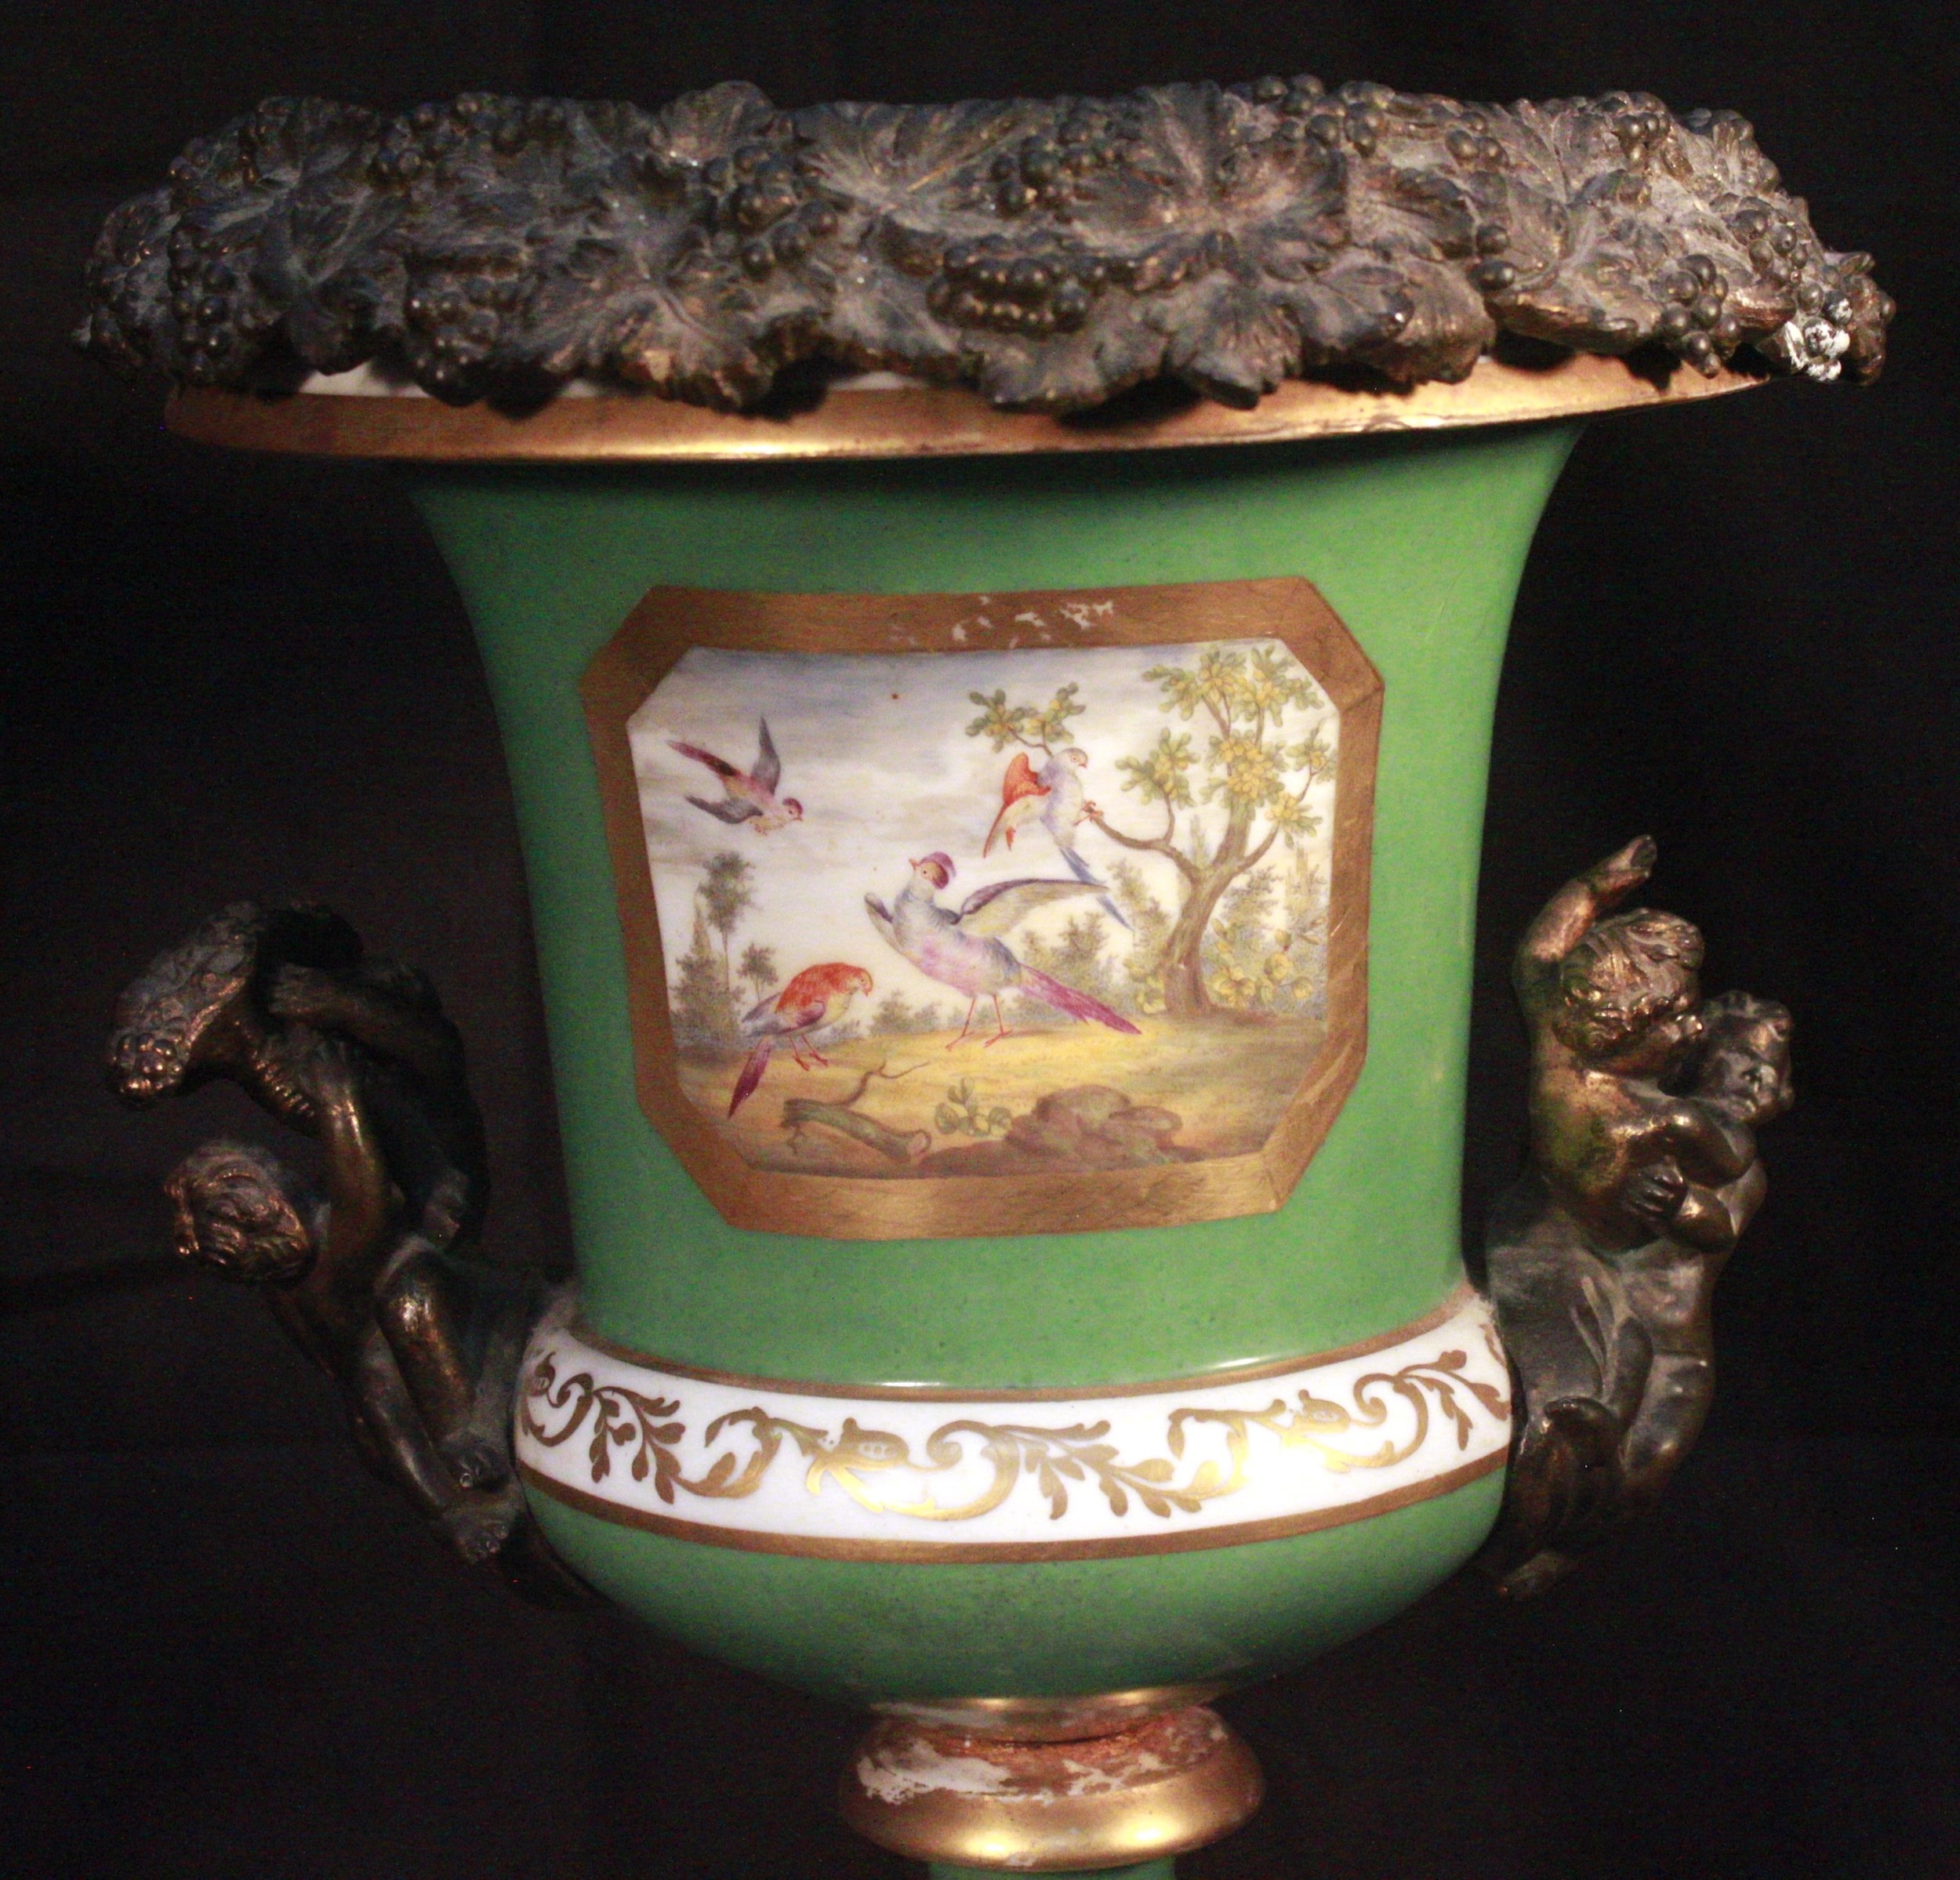 A late 18th century ormolu-mounted Sevres 'style' Porcelain campagna urn, painted in polychrome